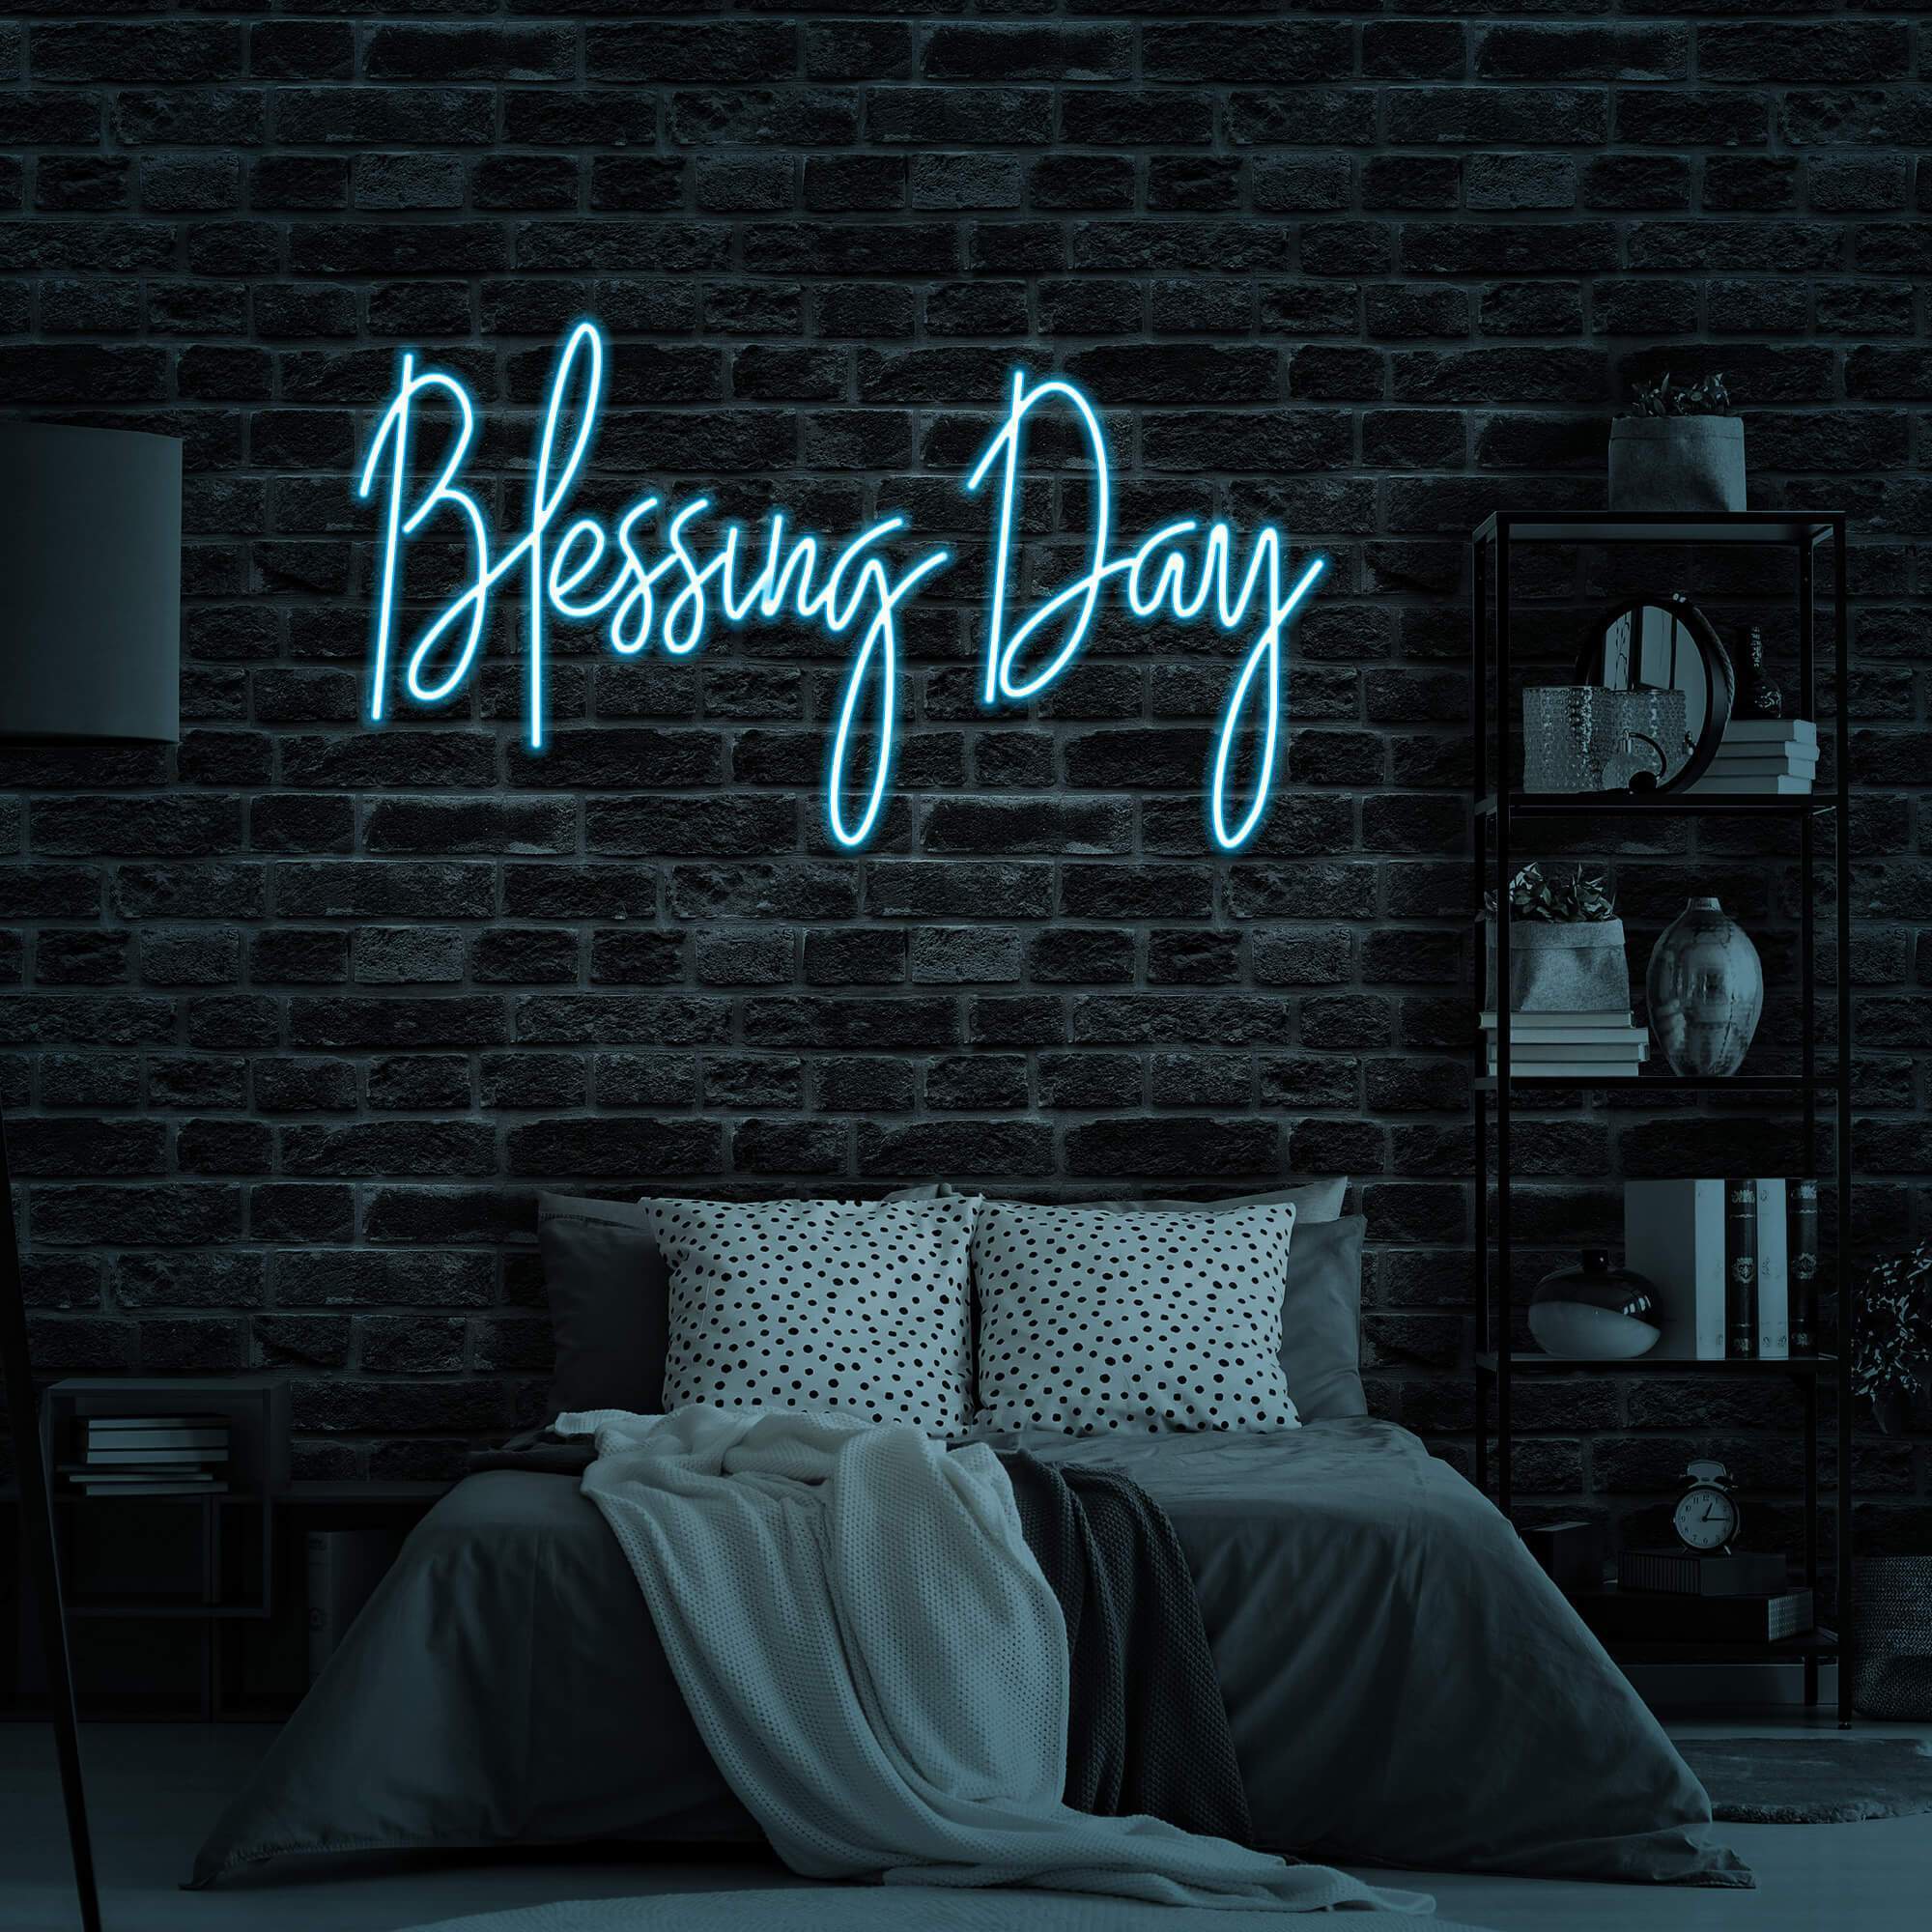 Blessing Day Neon Wedding Sign Lights